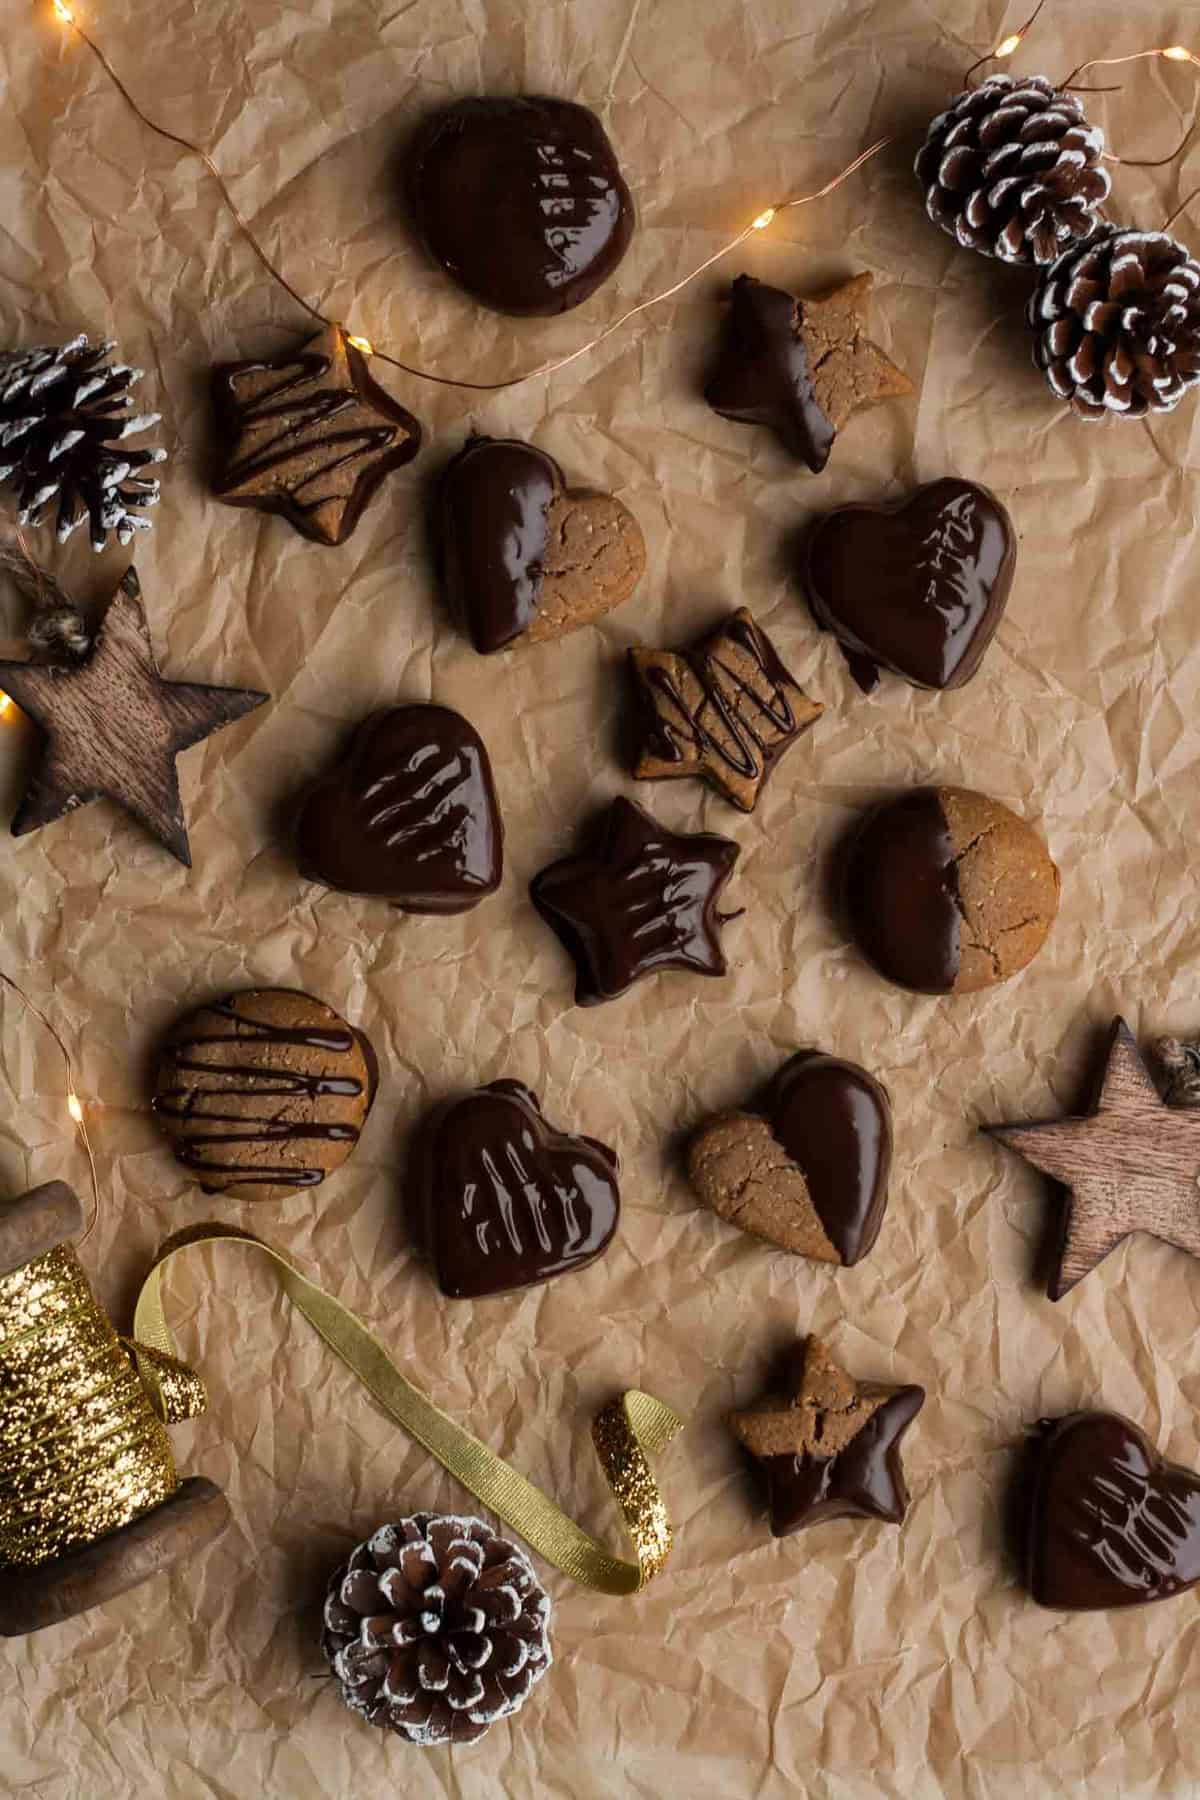 An array of chocolate lebkuchen cookies on a sheet of parchment paper with various decorations.